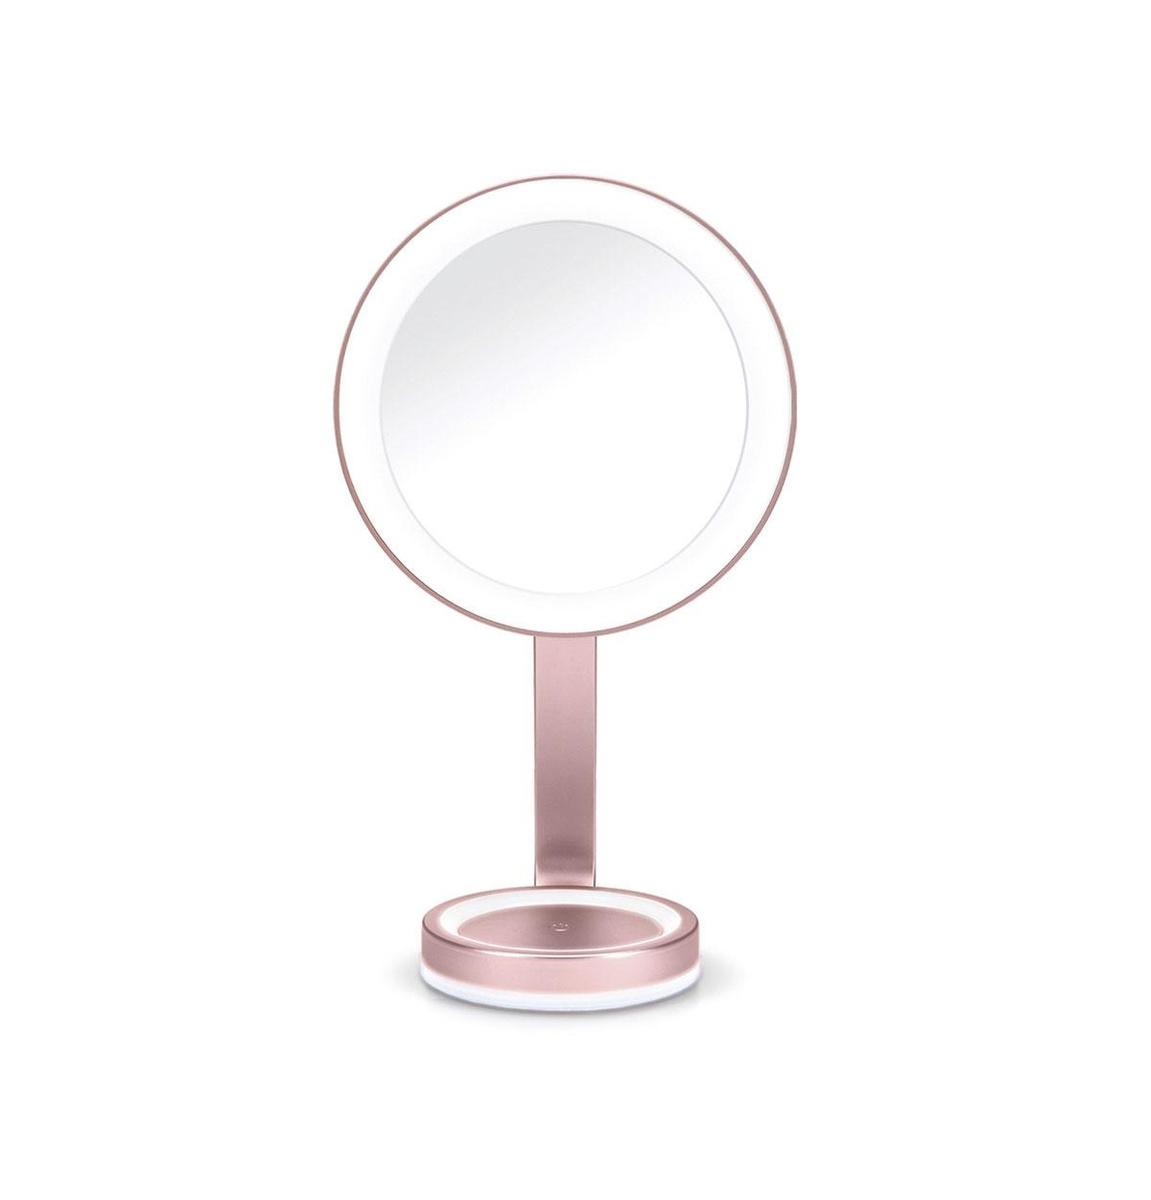 Obsessions beauté: Miroir grossissant Led Beauty Mirror (129,90 euros), Babyliss, babyliss.fr